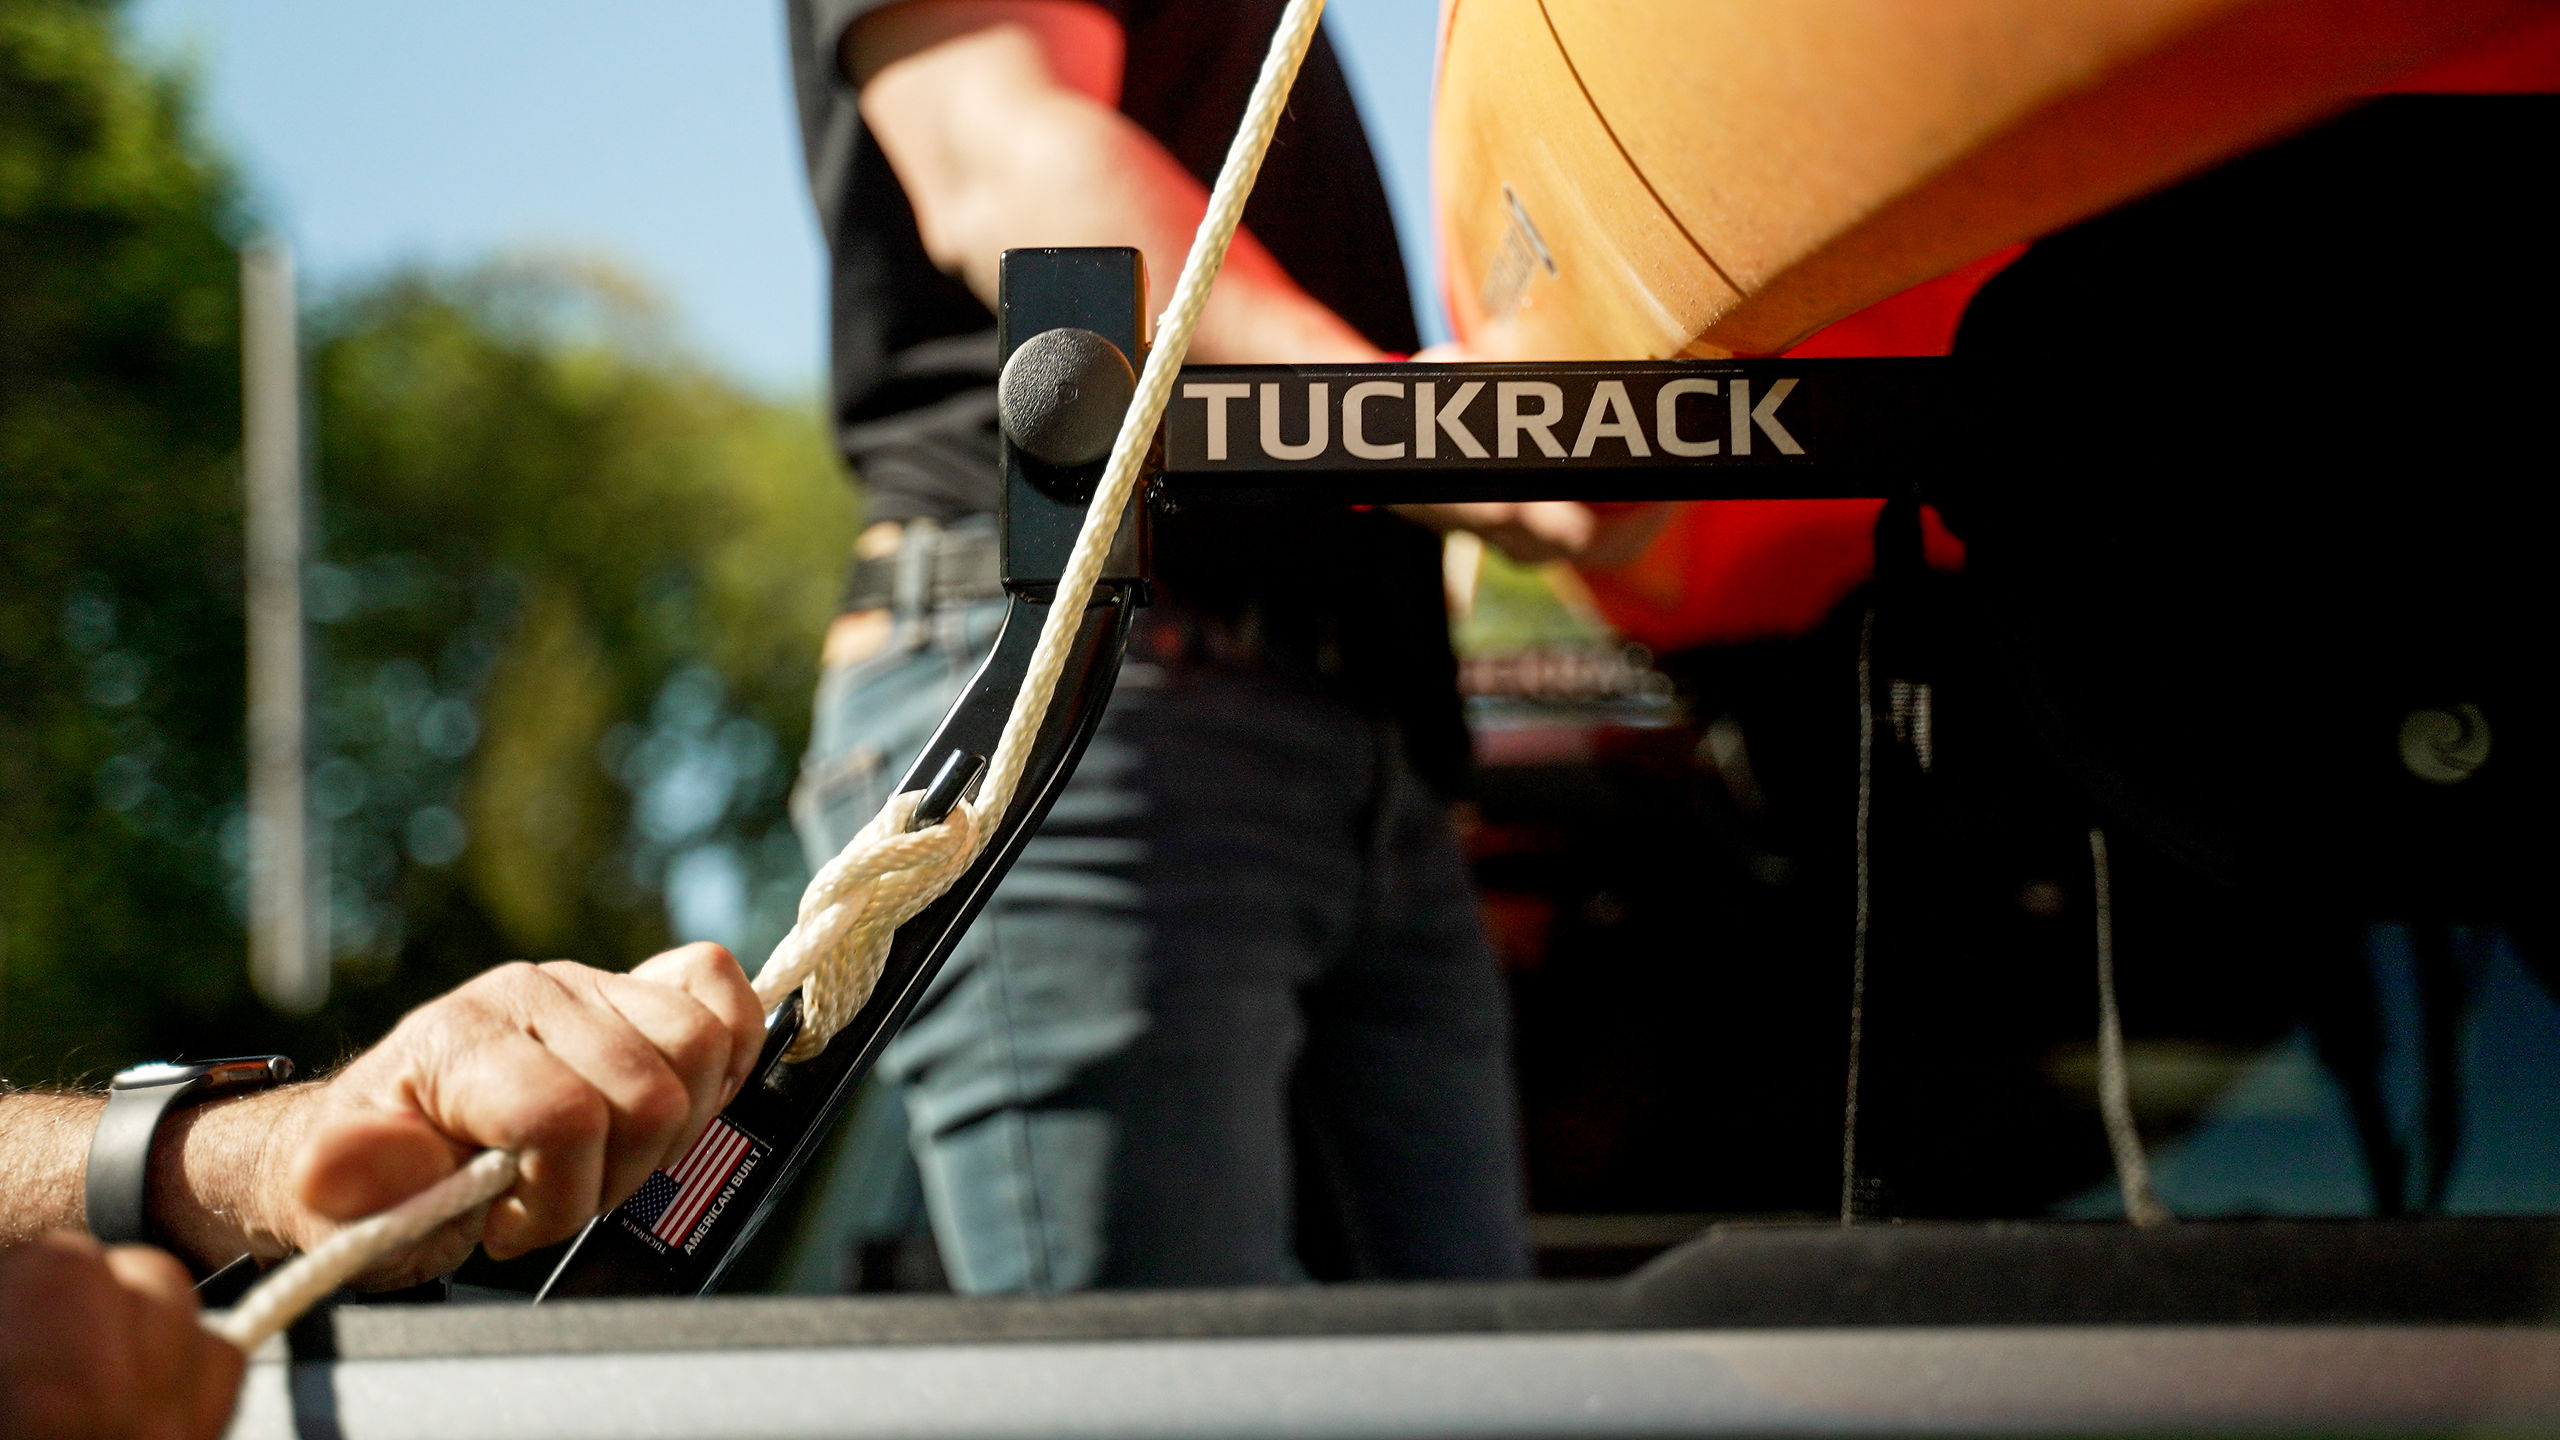 Introduction to TuckRack